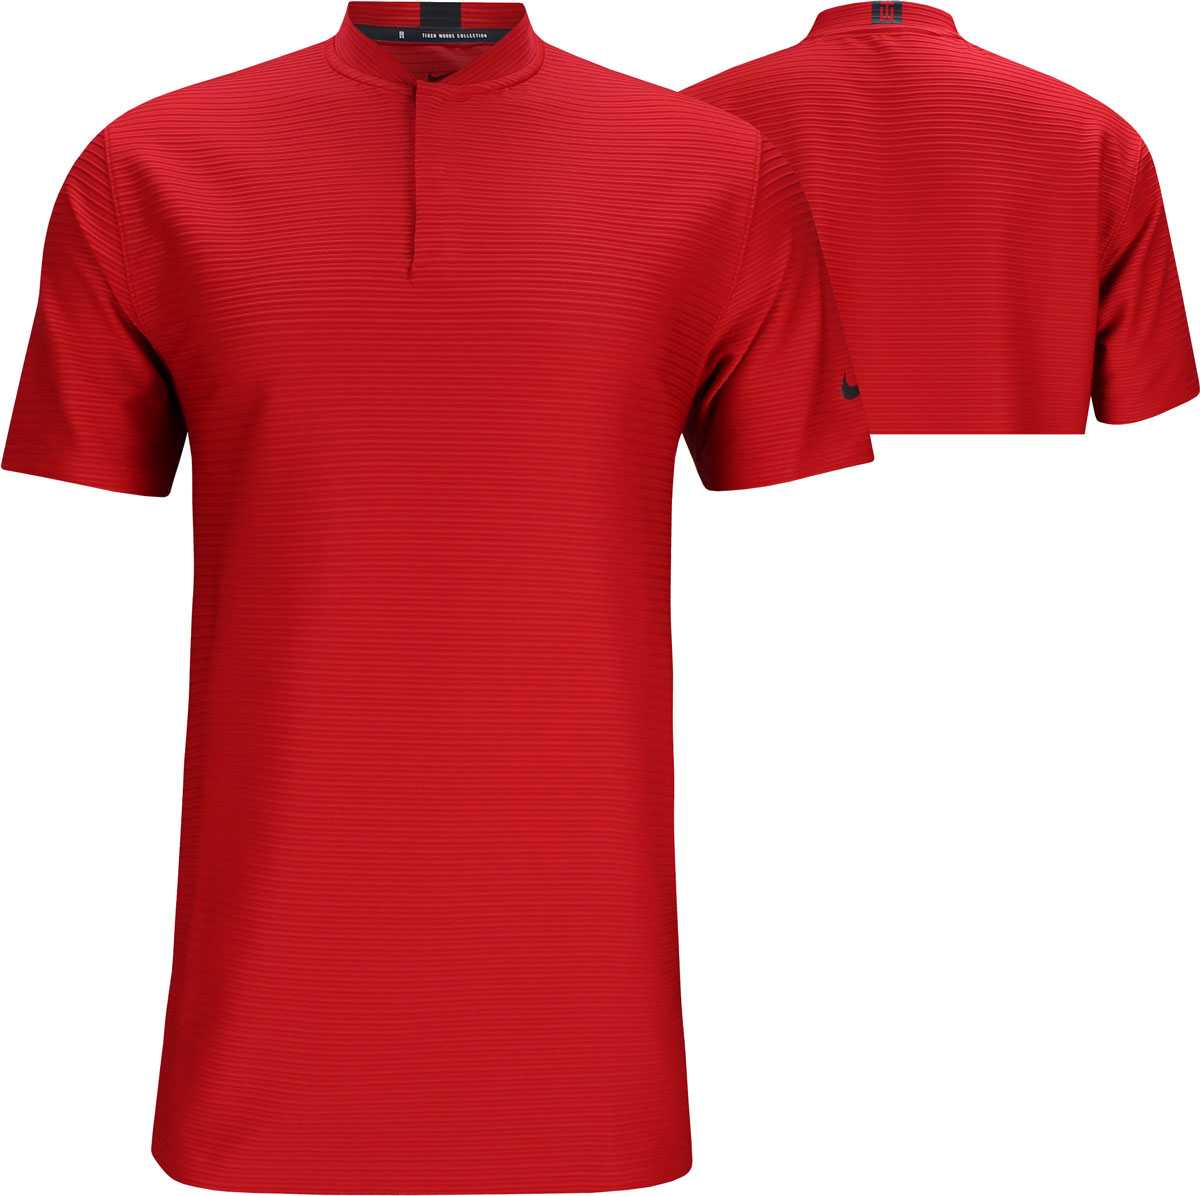 tiger woods red golf shirts